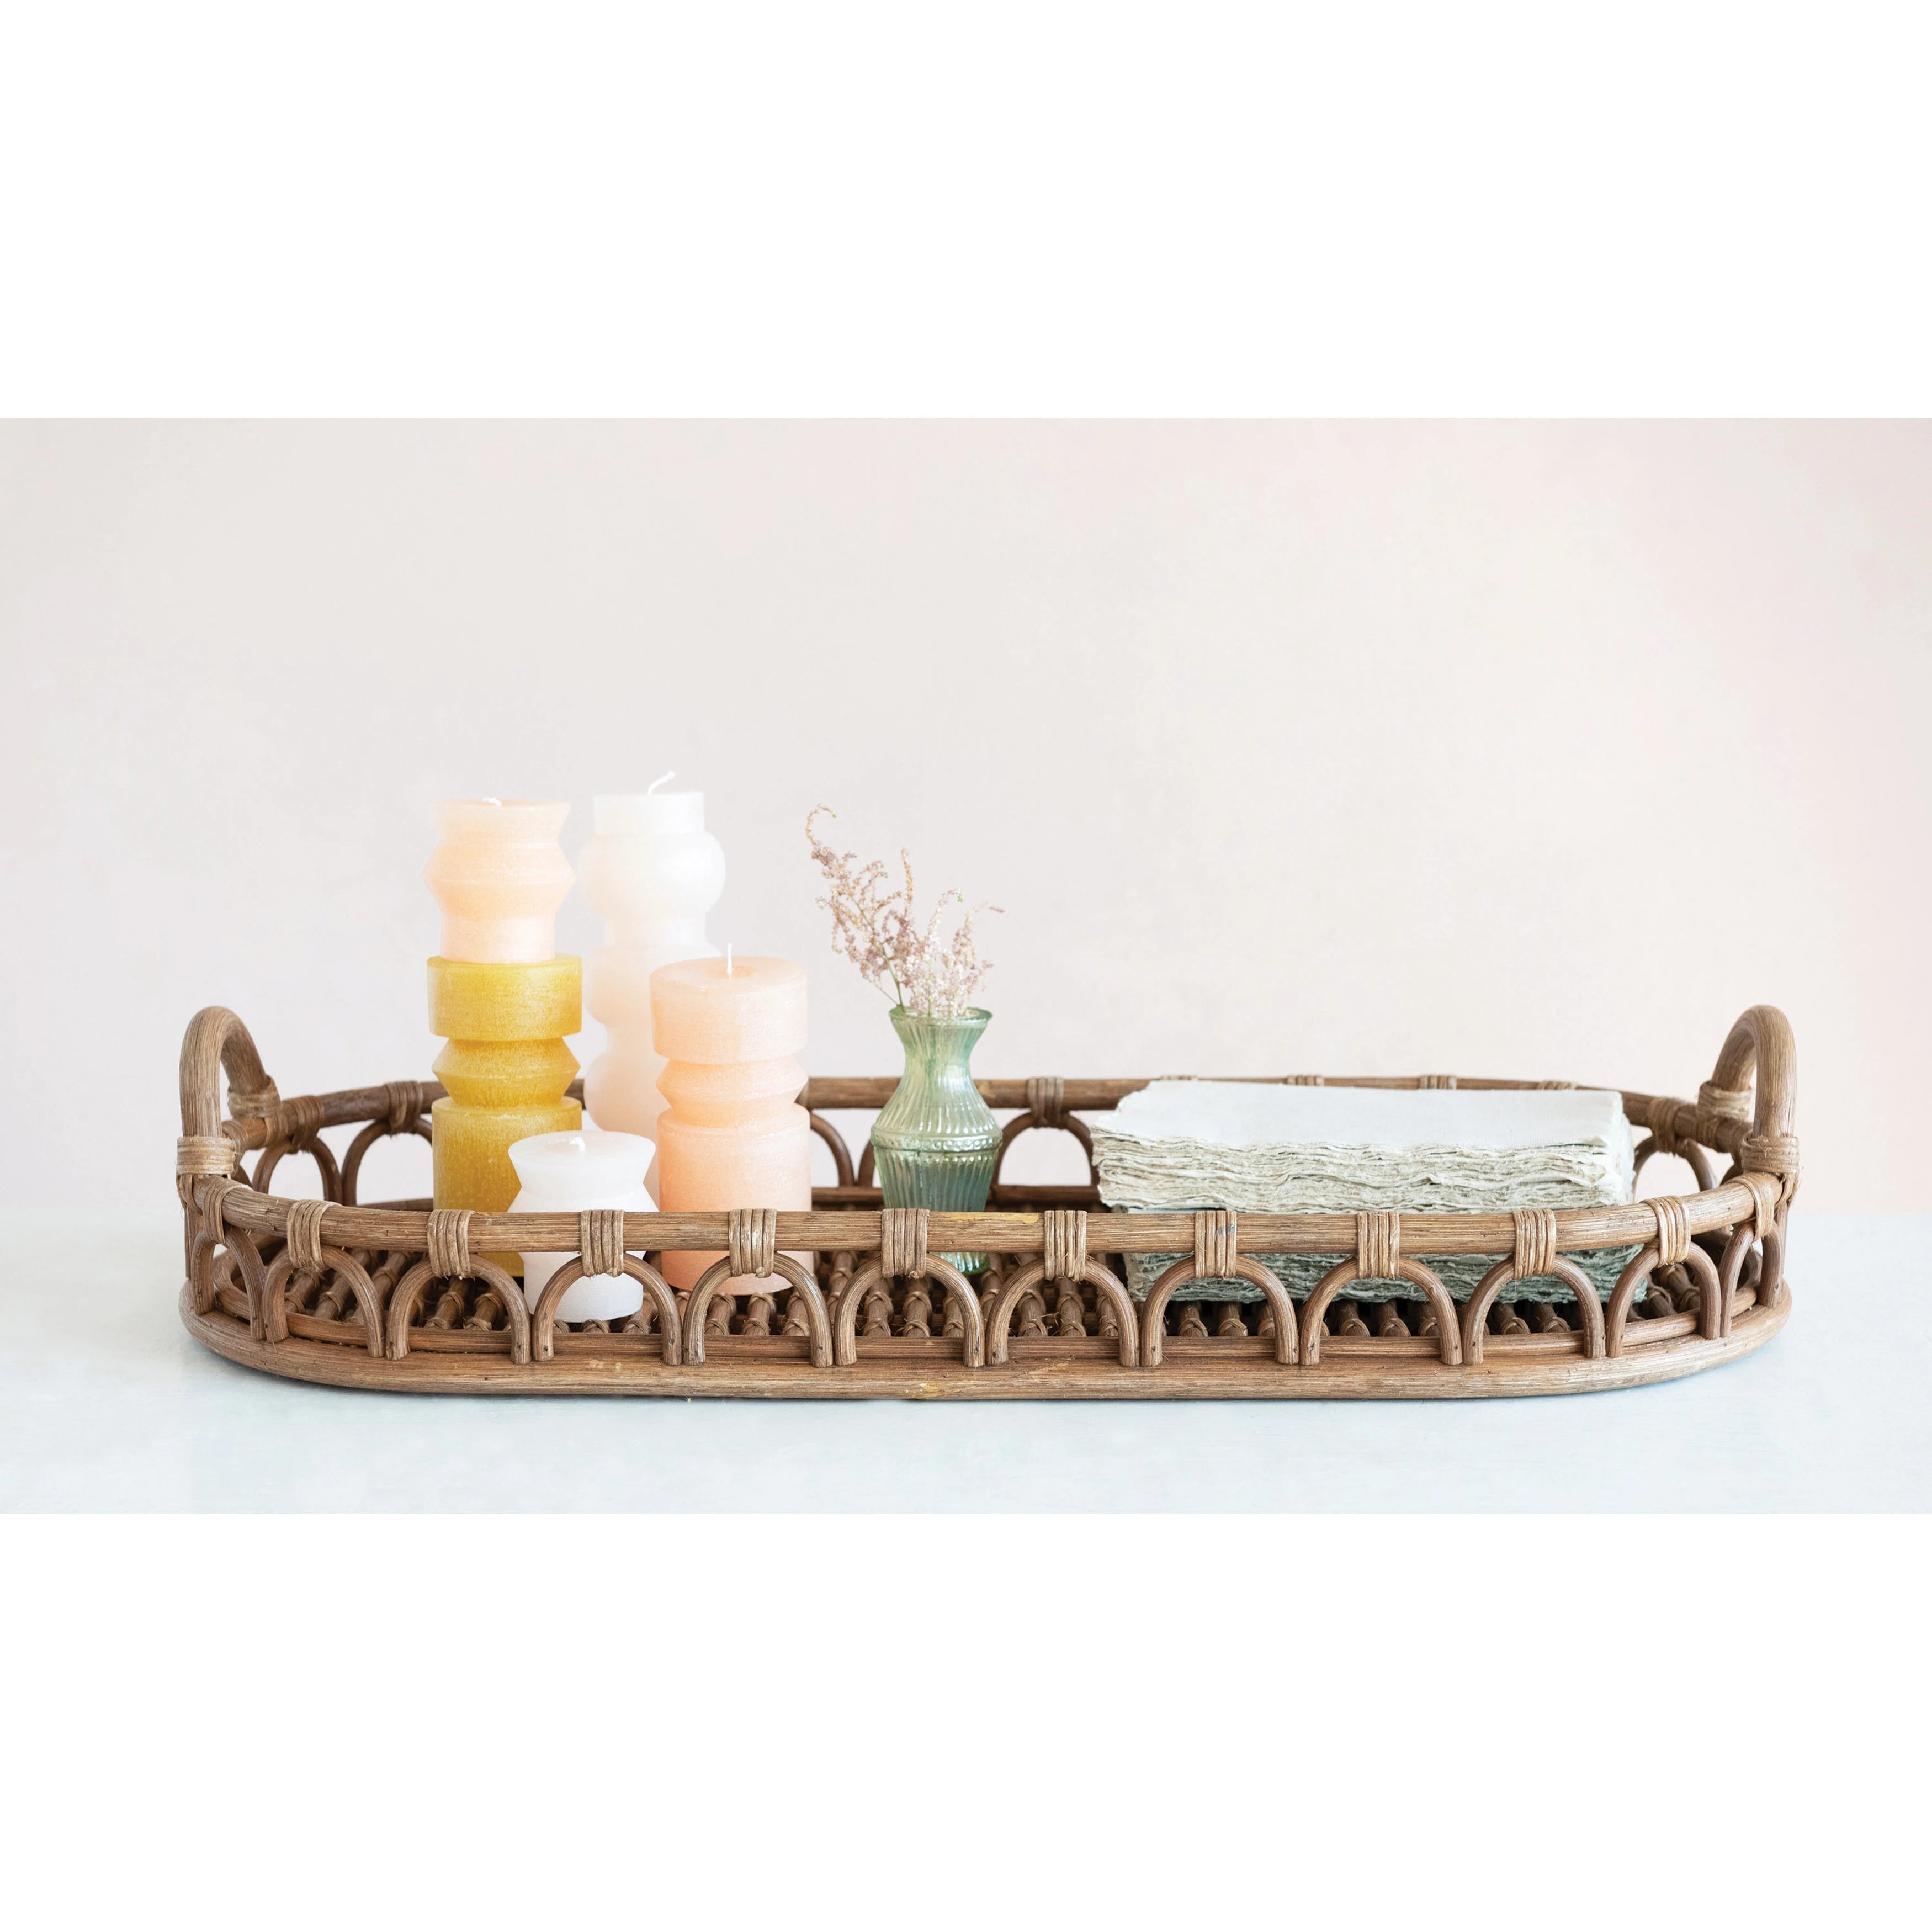 Hand-Woven Rattan Tray with Handles